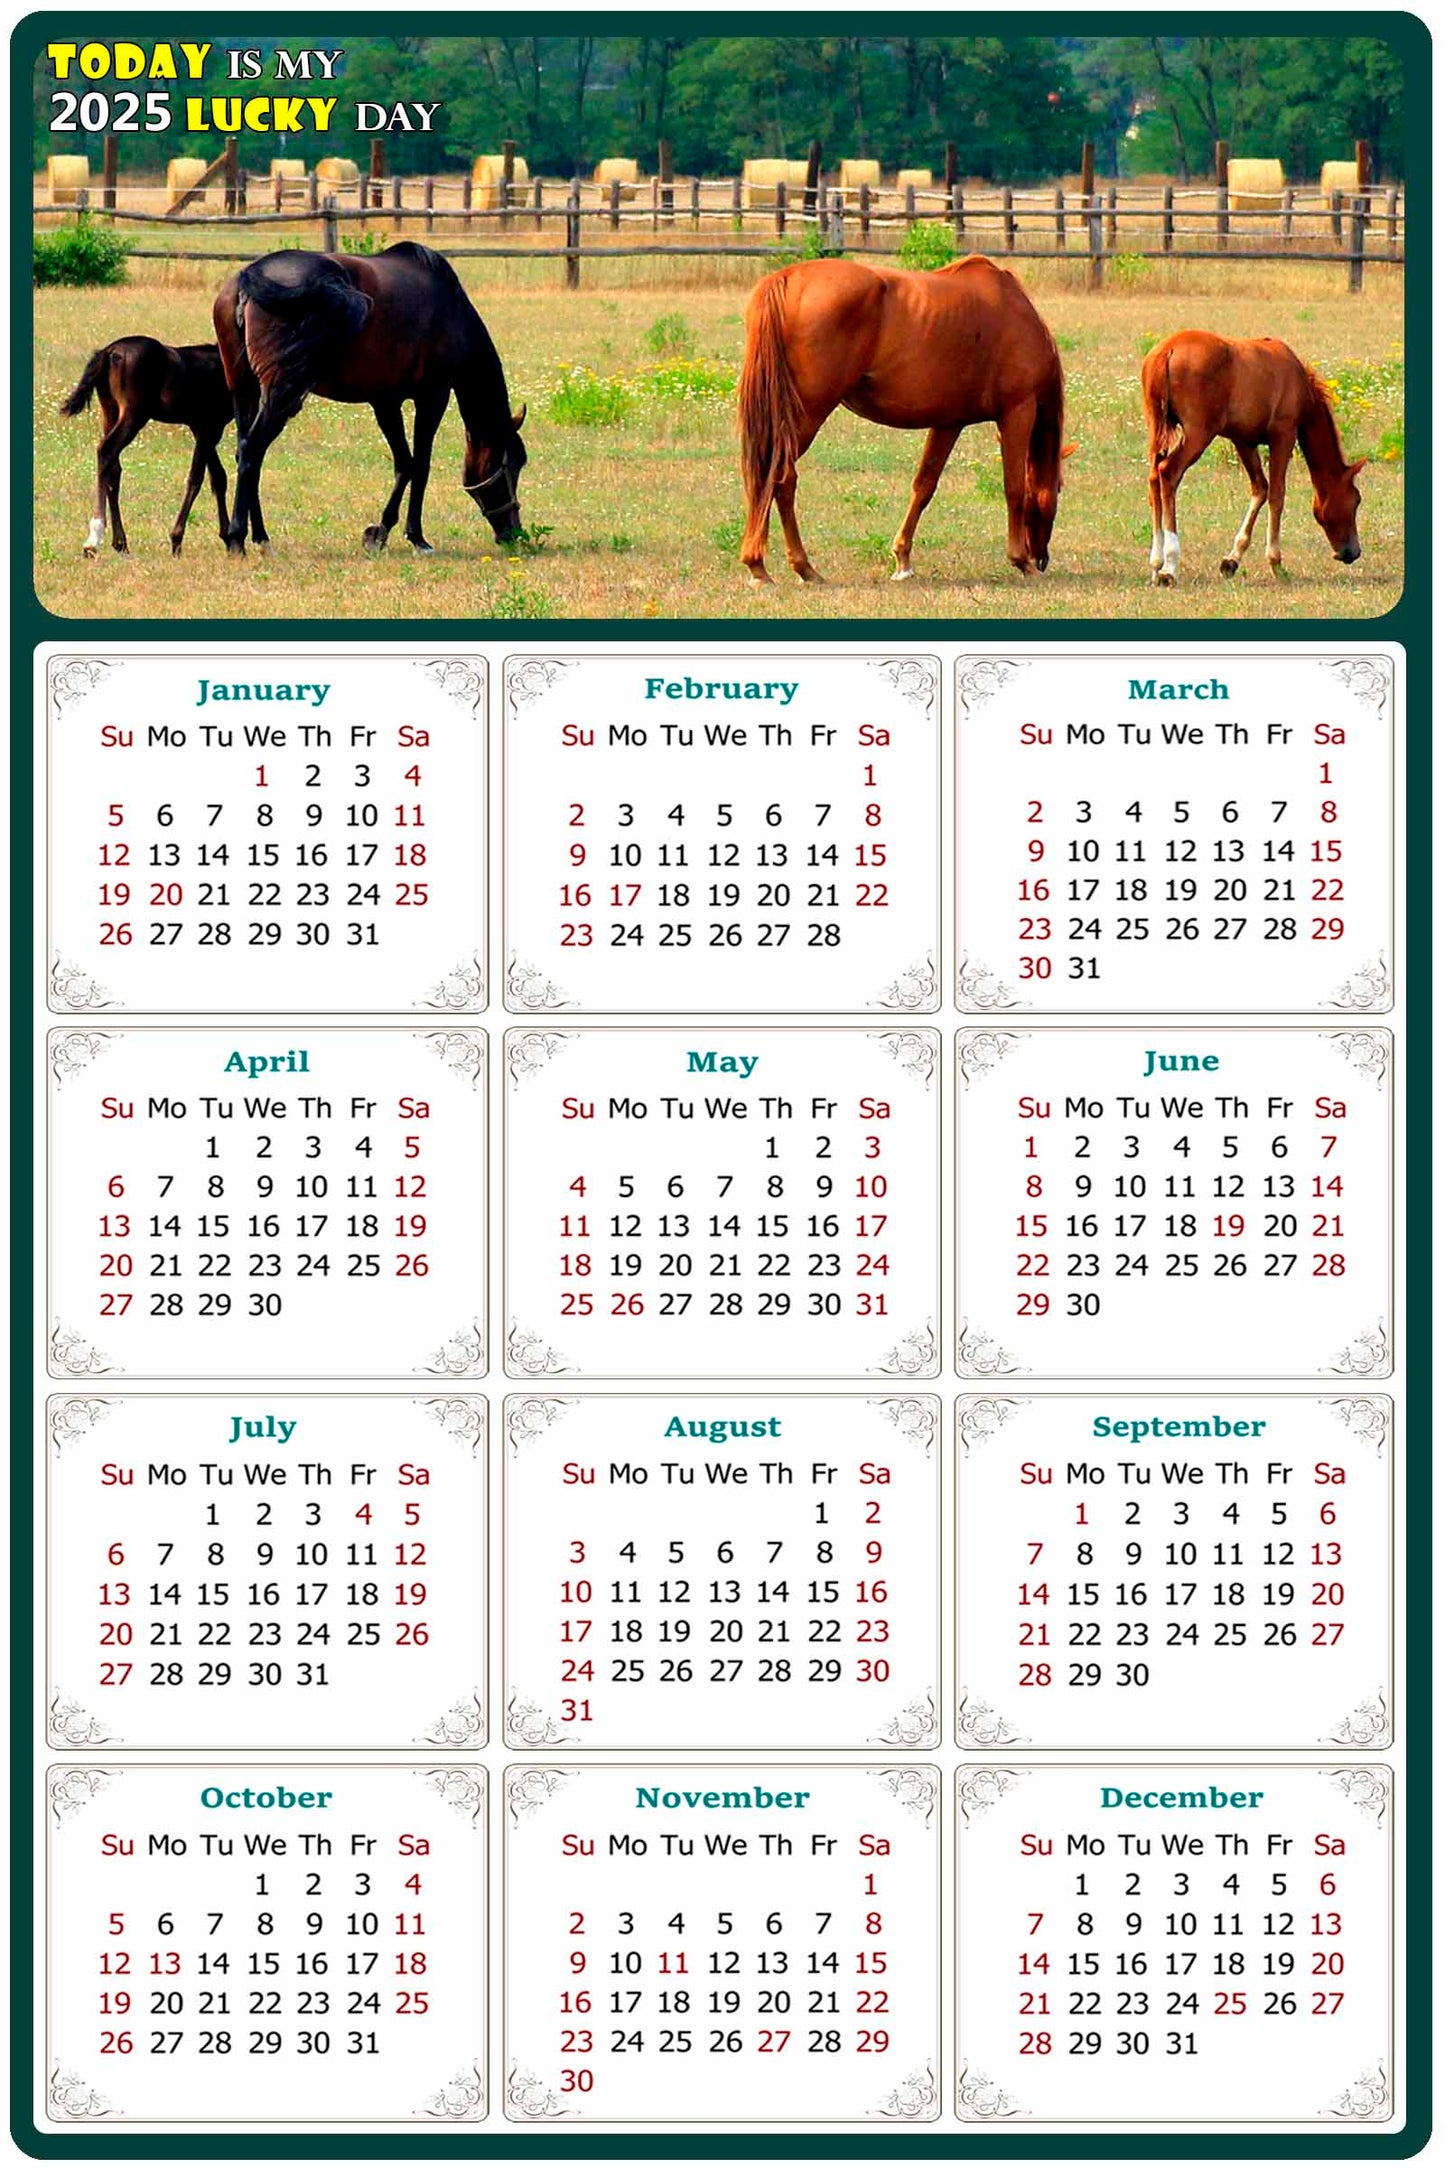 2025 Magnetic Calendar - Calendar Magnets - Today is my Lucky Day - (Fade, Tear, and Water Resistant) - Horses Themed 010